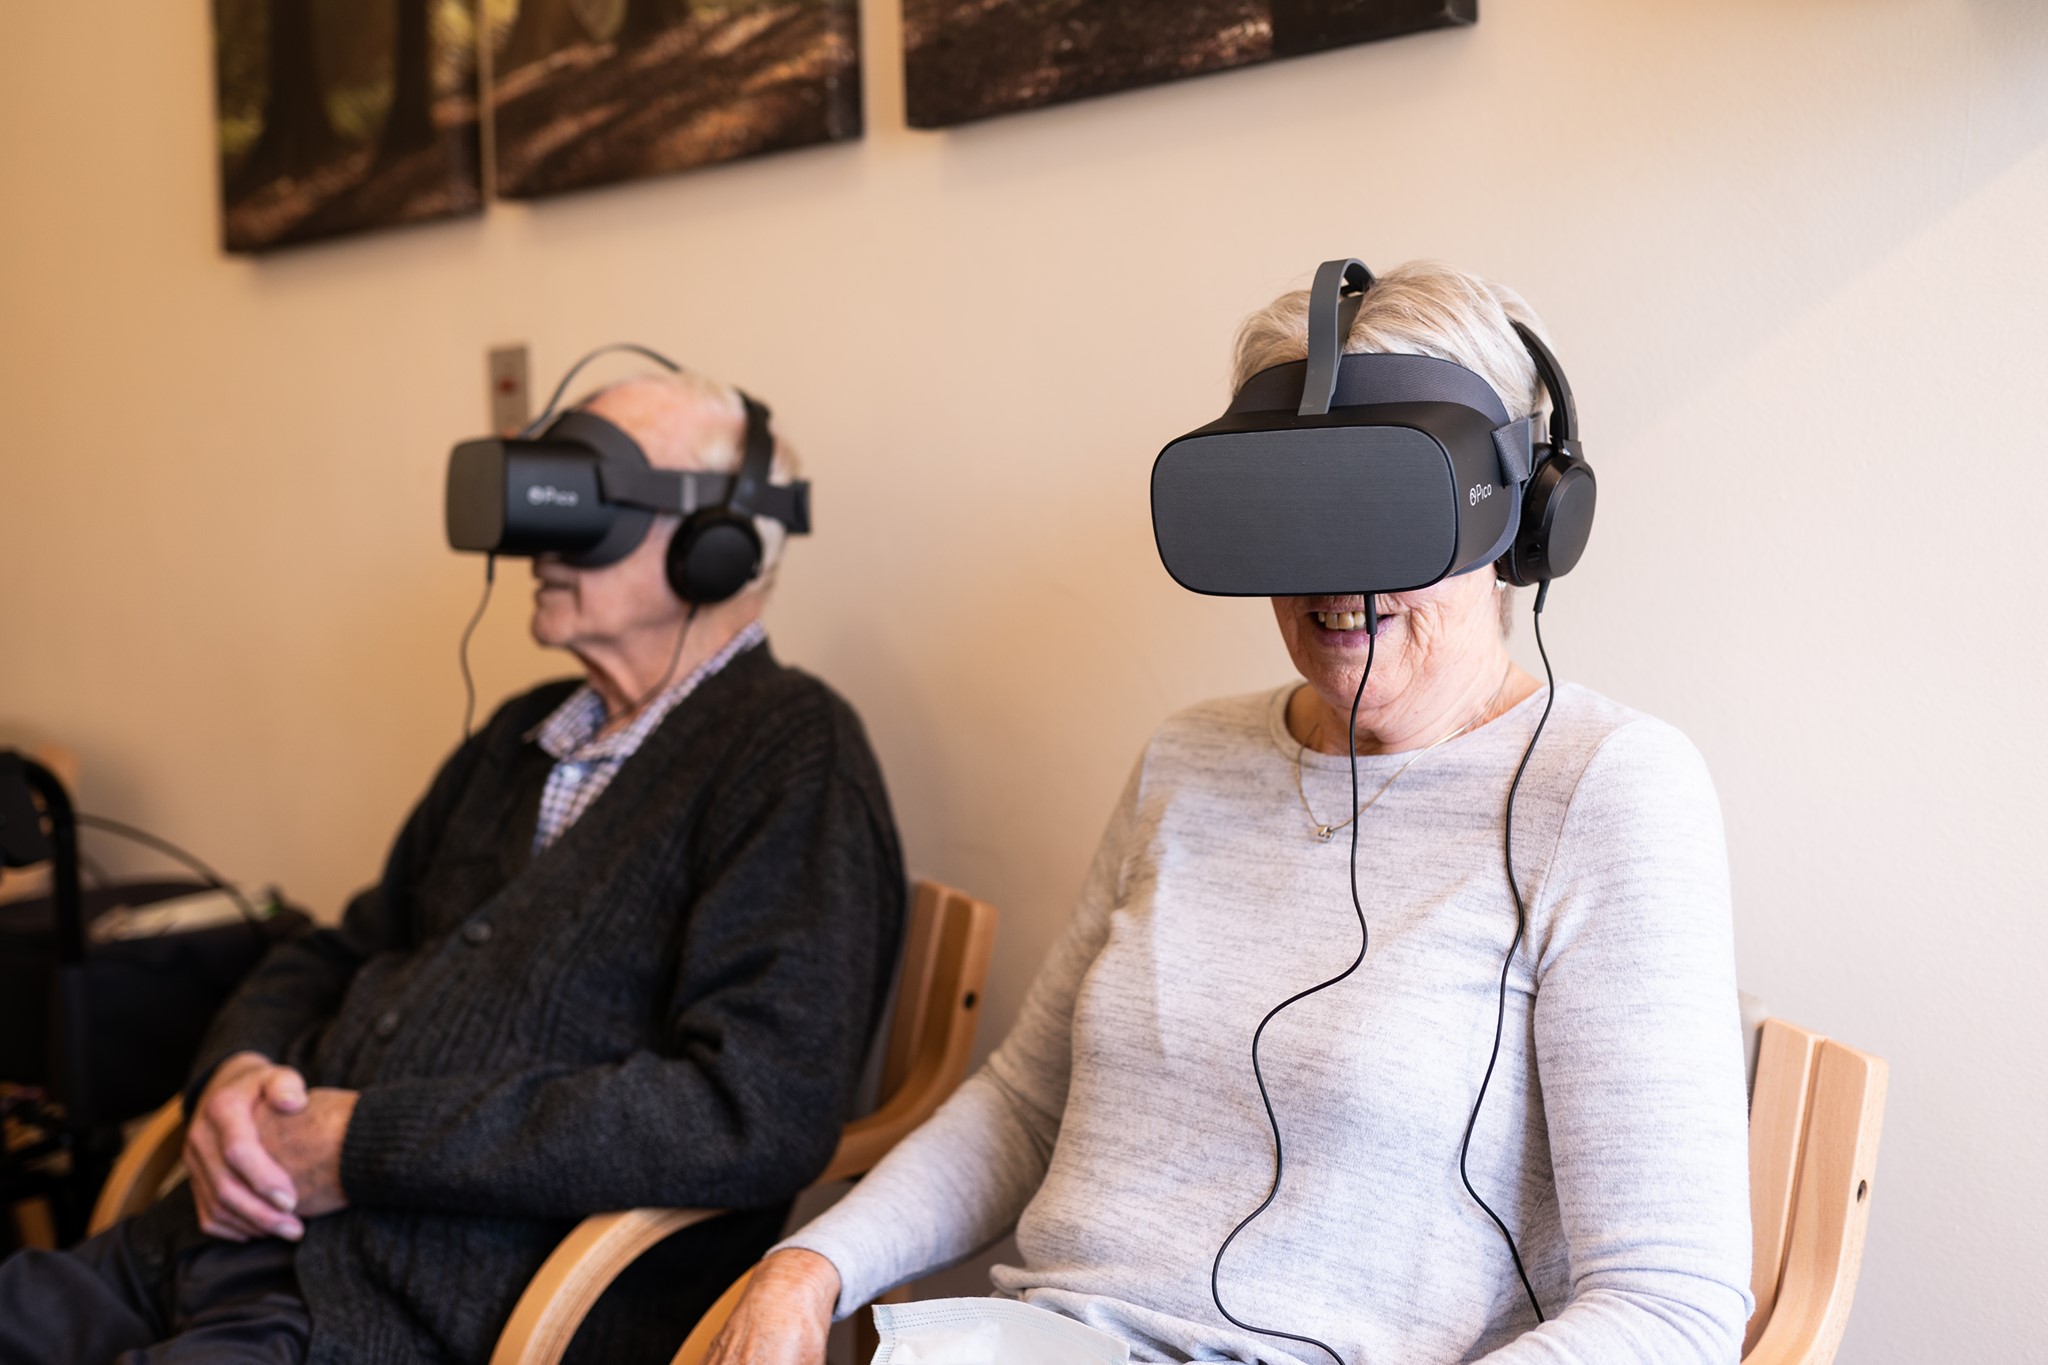 Patients experiencing virtual reality, to explore the world while in the hospice.